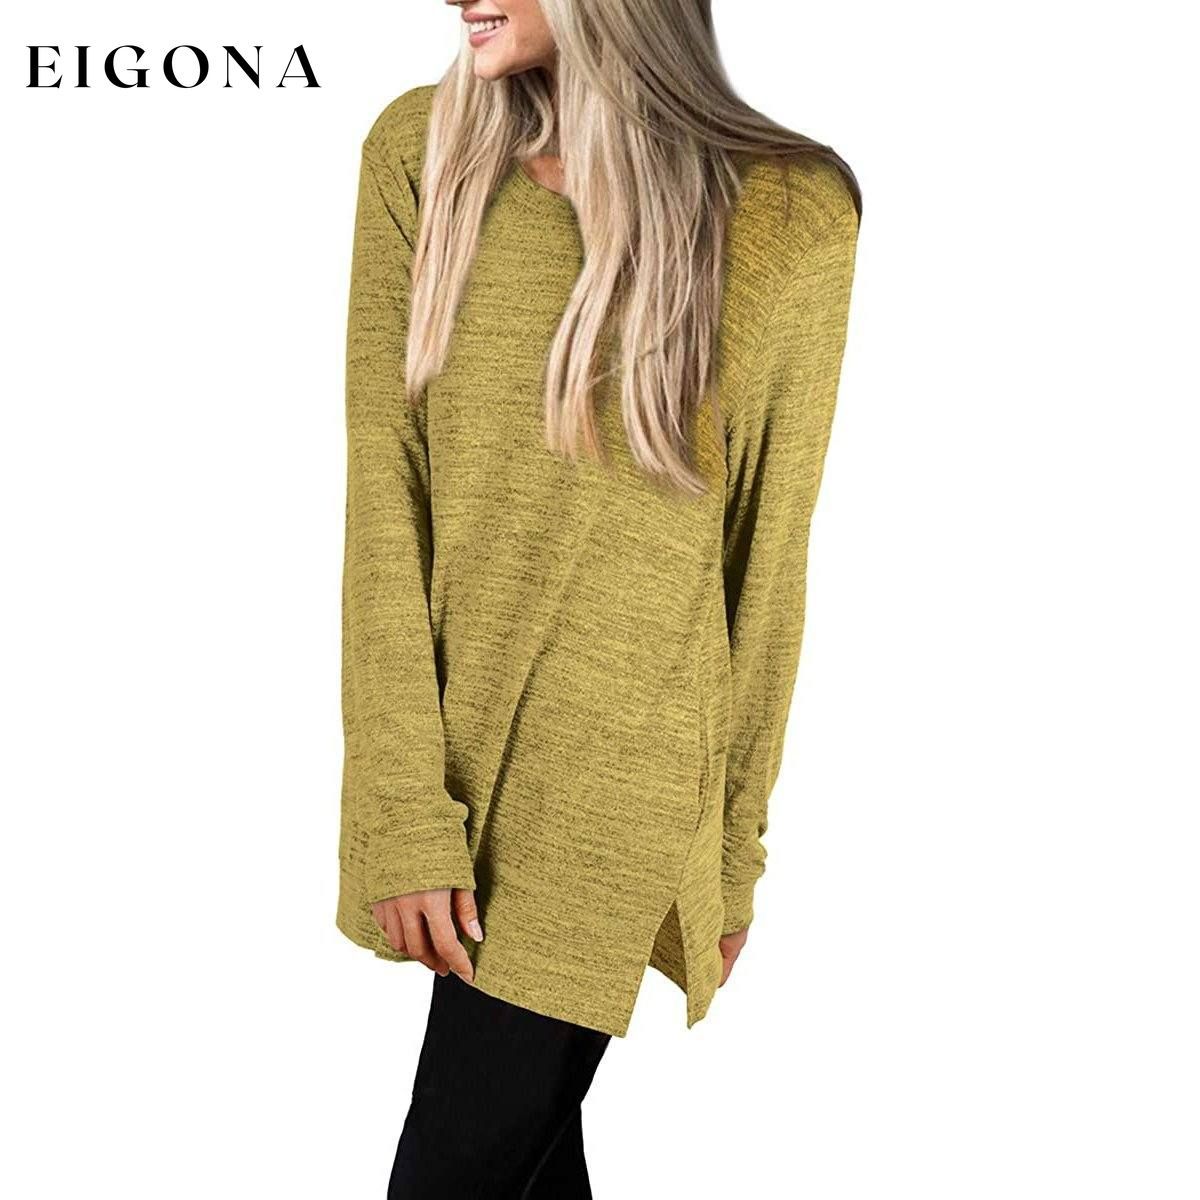 Women's Casual Sweatshirts Long Sleeve Oversized Shirt __stock:50 clothes refund_fee:1200 tops